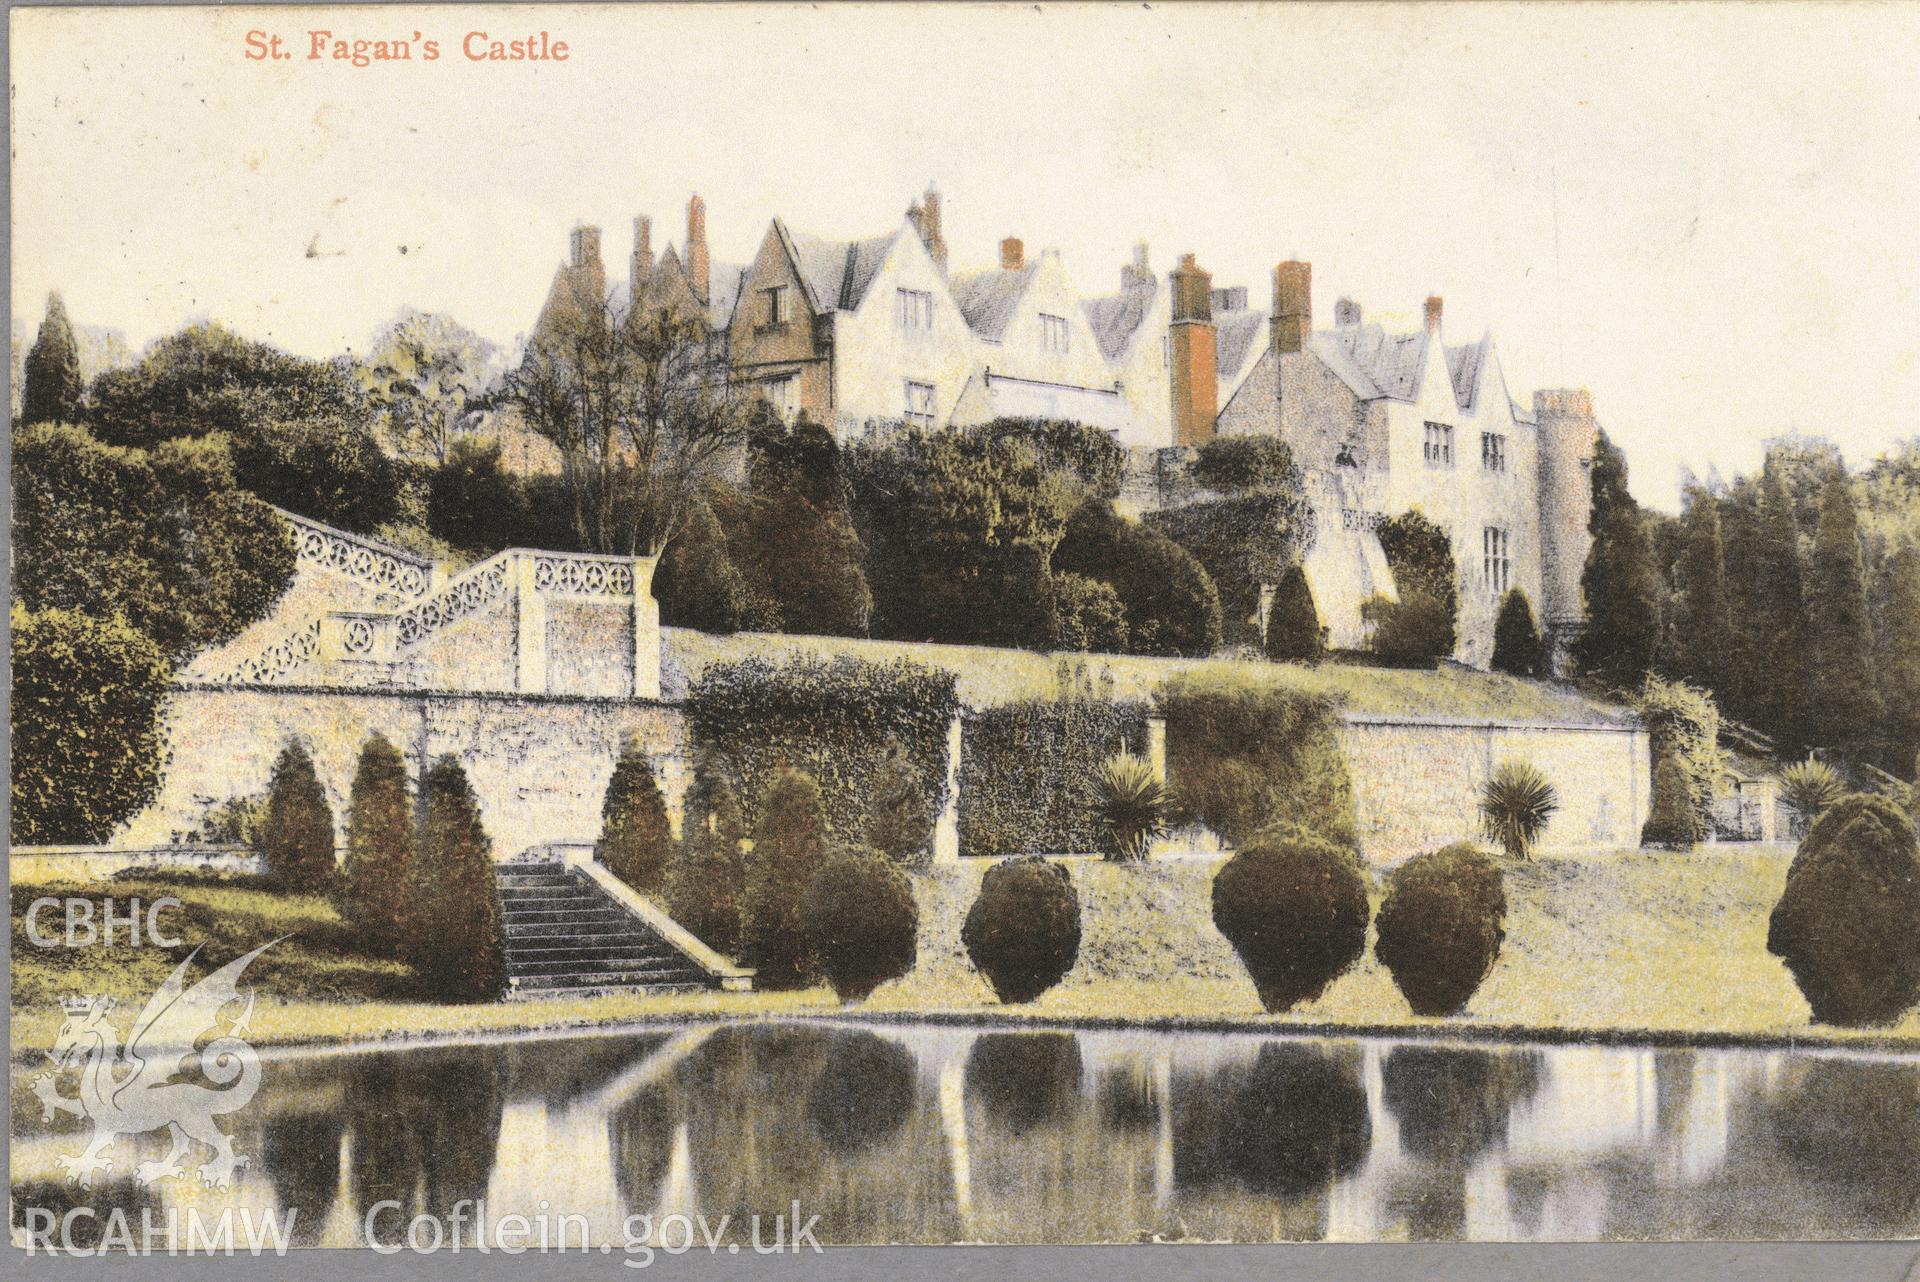 Digitised postcard image of St Fagans castle. Produced by Parks and Gardens Data Services, from an original item in the Peter Davis Collection at Parks and Gardens UK. We hold only web-resolution images of this collection, suitable for viewing on screen and for research purposes only. We do not hold the original images, or publication quality scans.